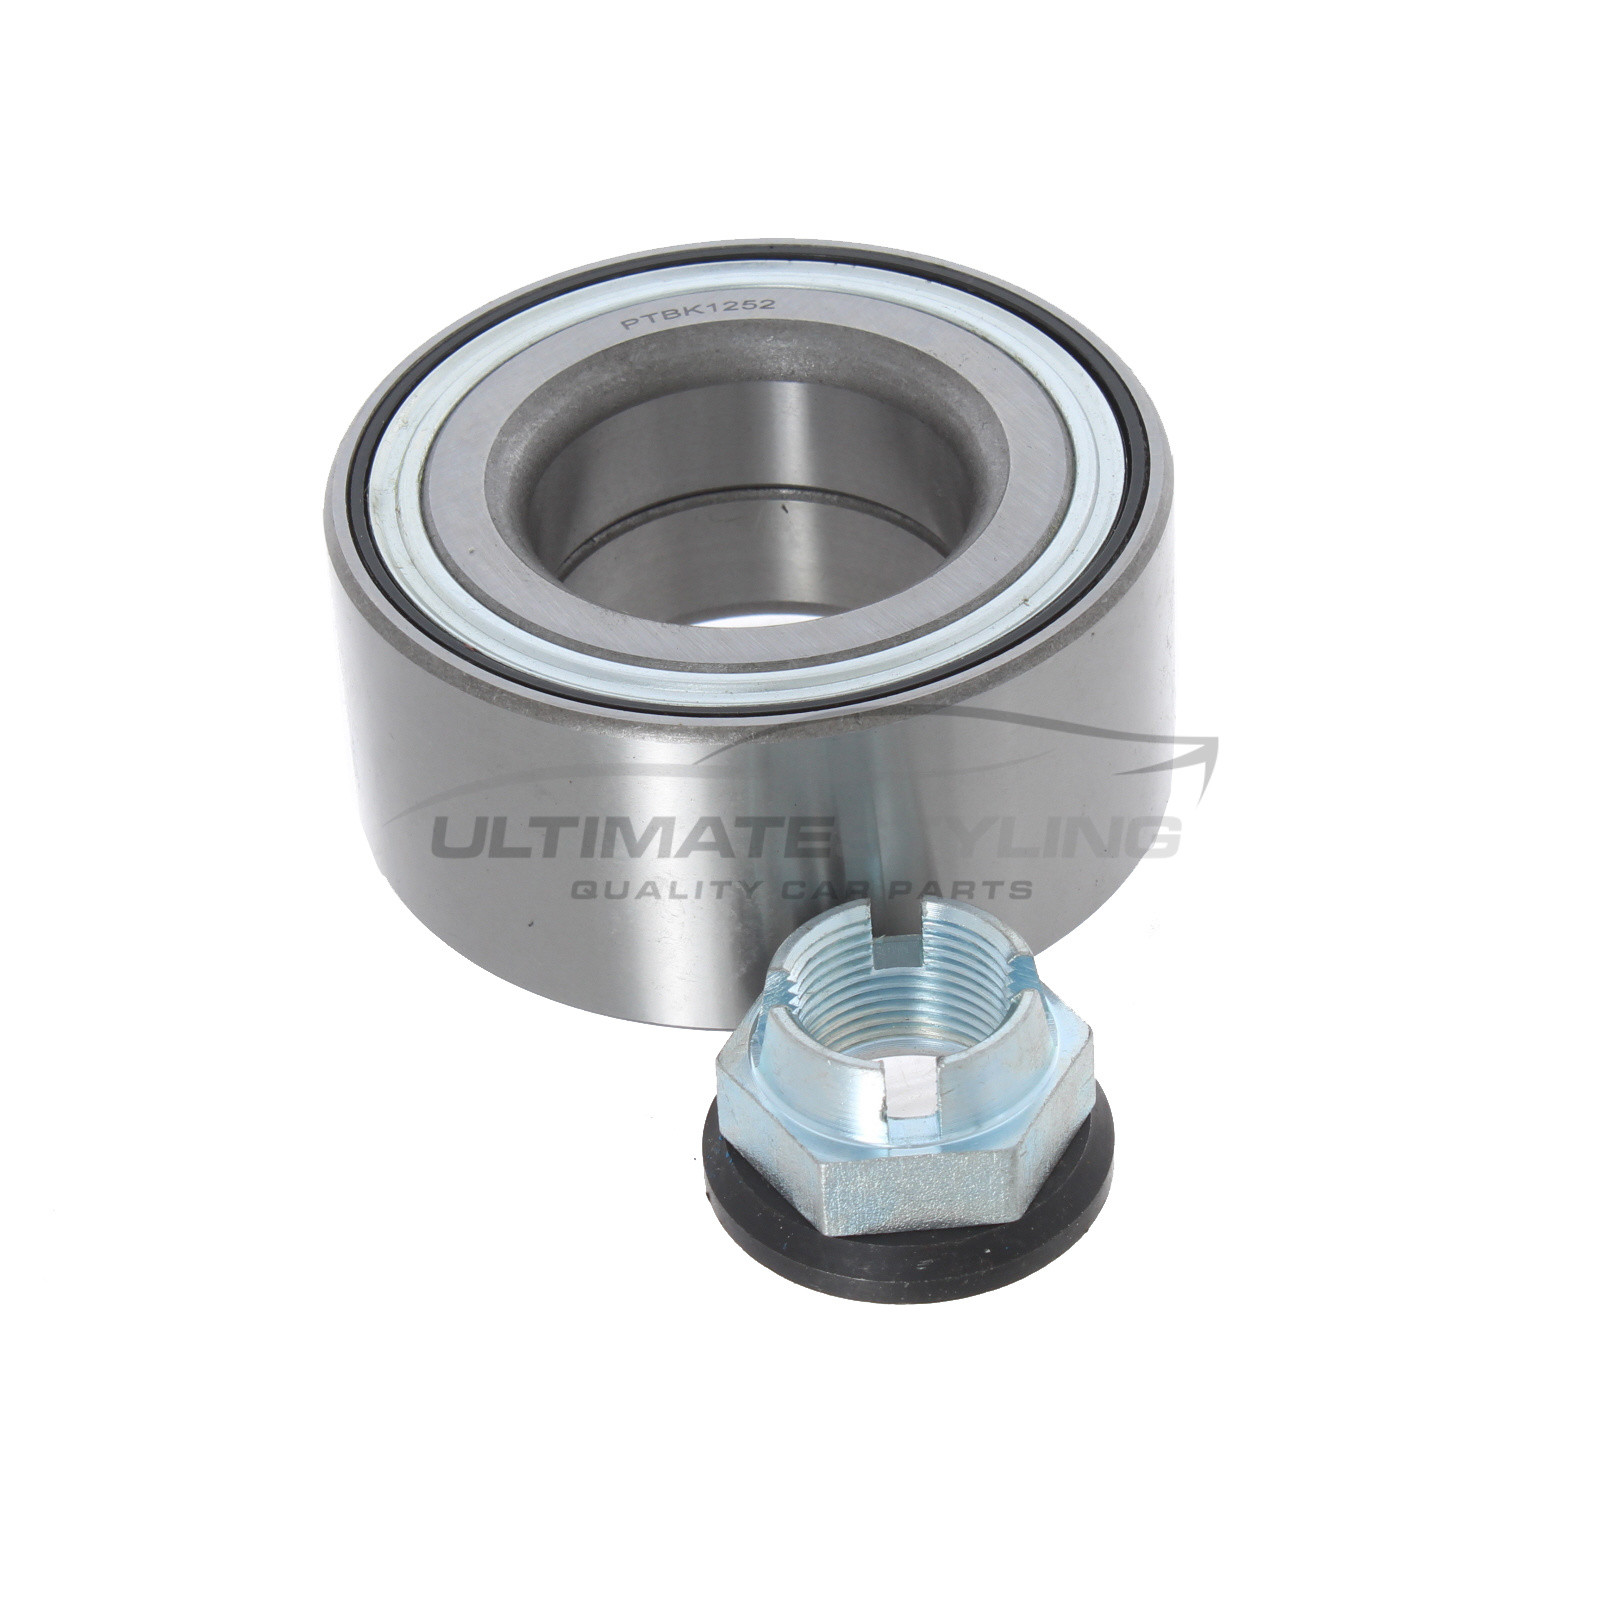 DCI 80/100 2001-ONWARDS FRONT WHEEL BEARING FIT FOR NISSAN PRIMASTAR X83 2.0 